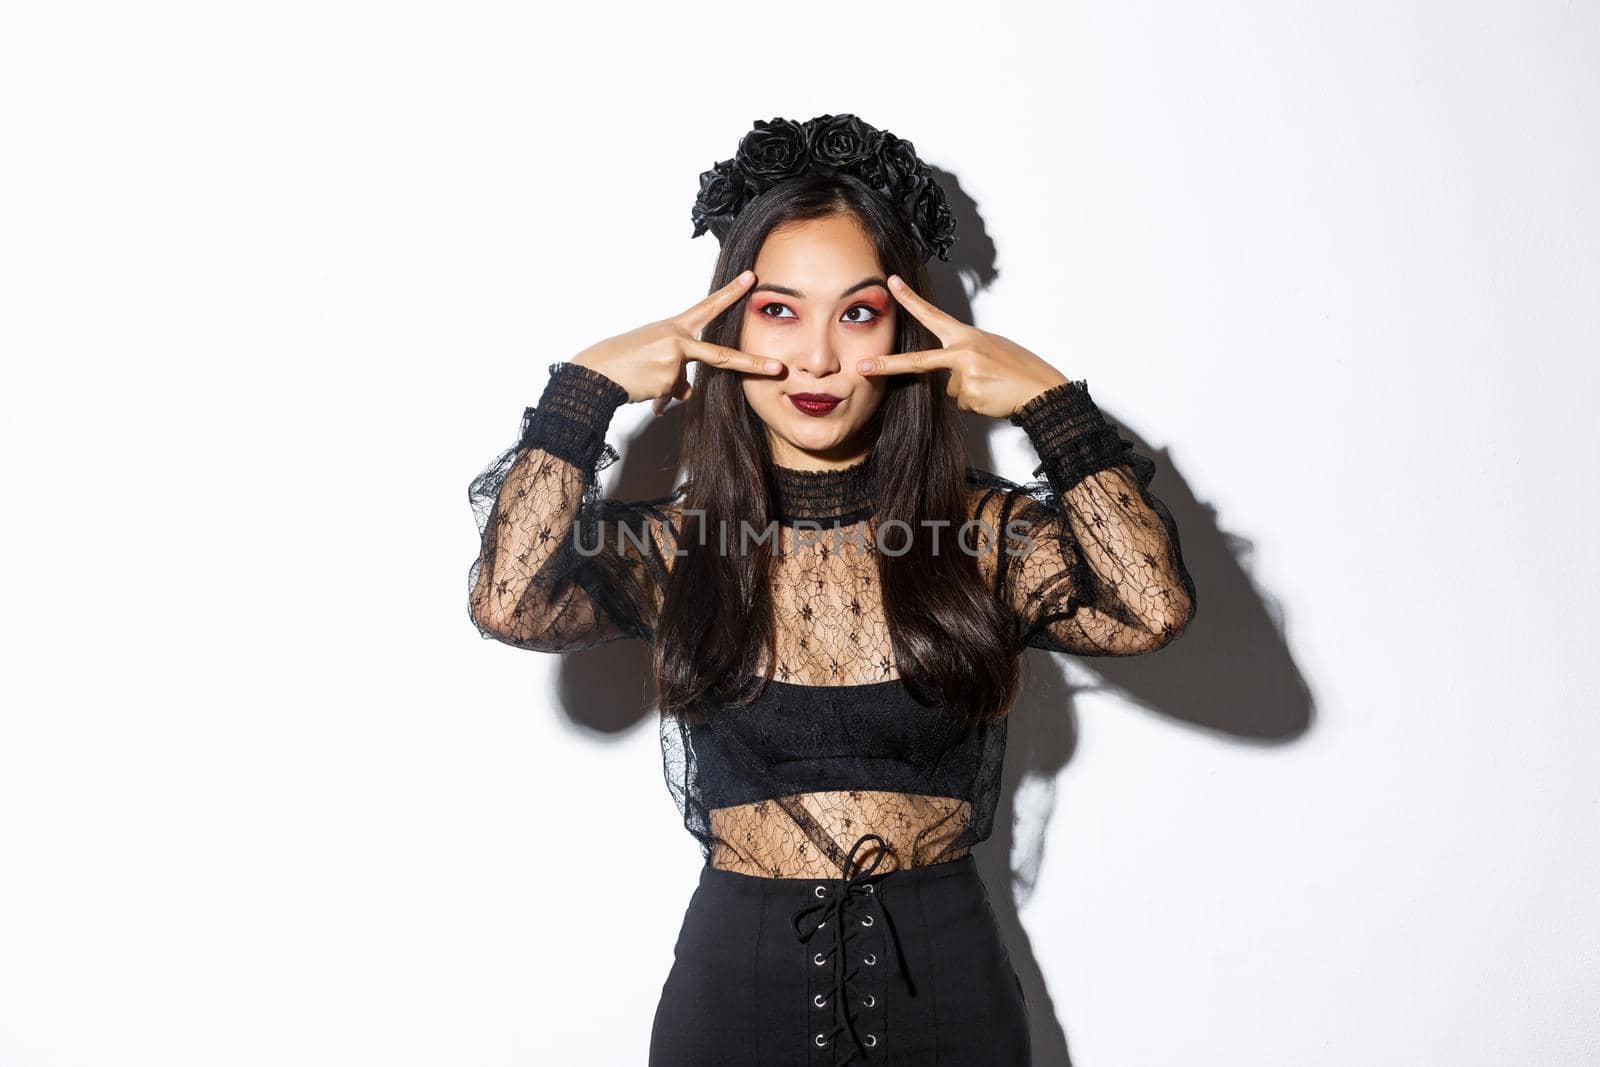 Beautiful asian woman in halloween party outfit looking at upper left corner, making peace gestures over eyes, standing in gothic lace dress with black wreath over white background.